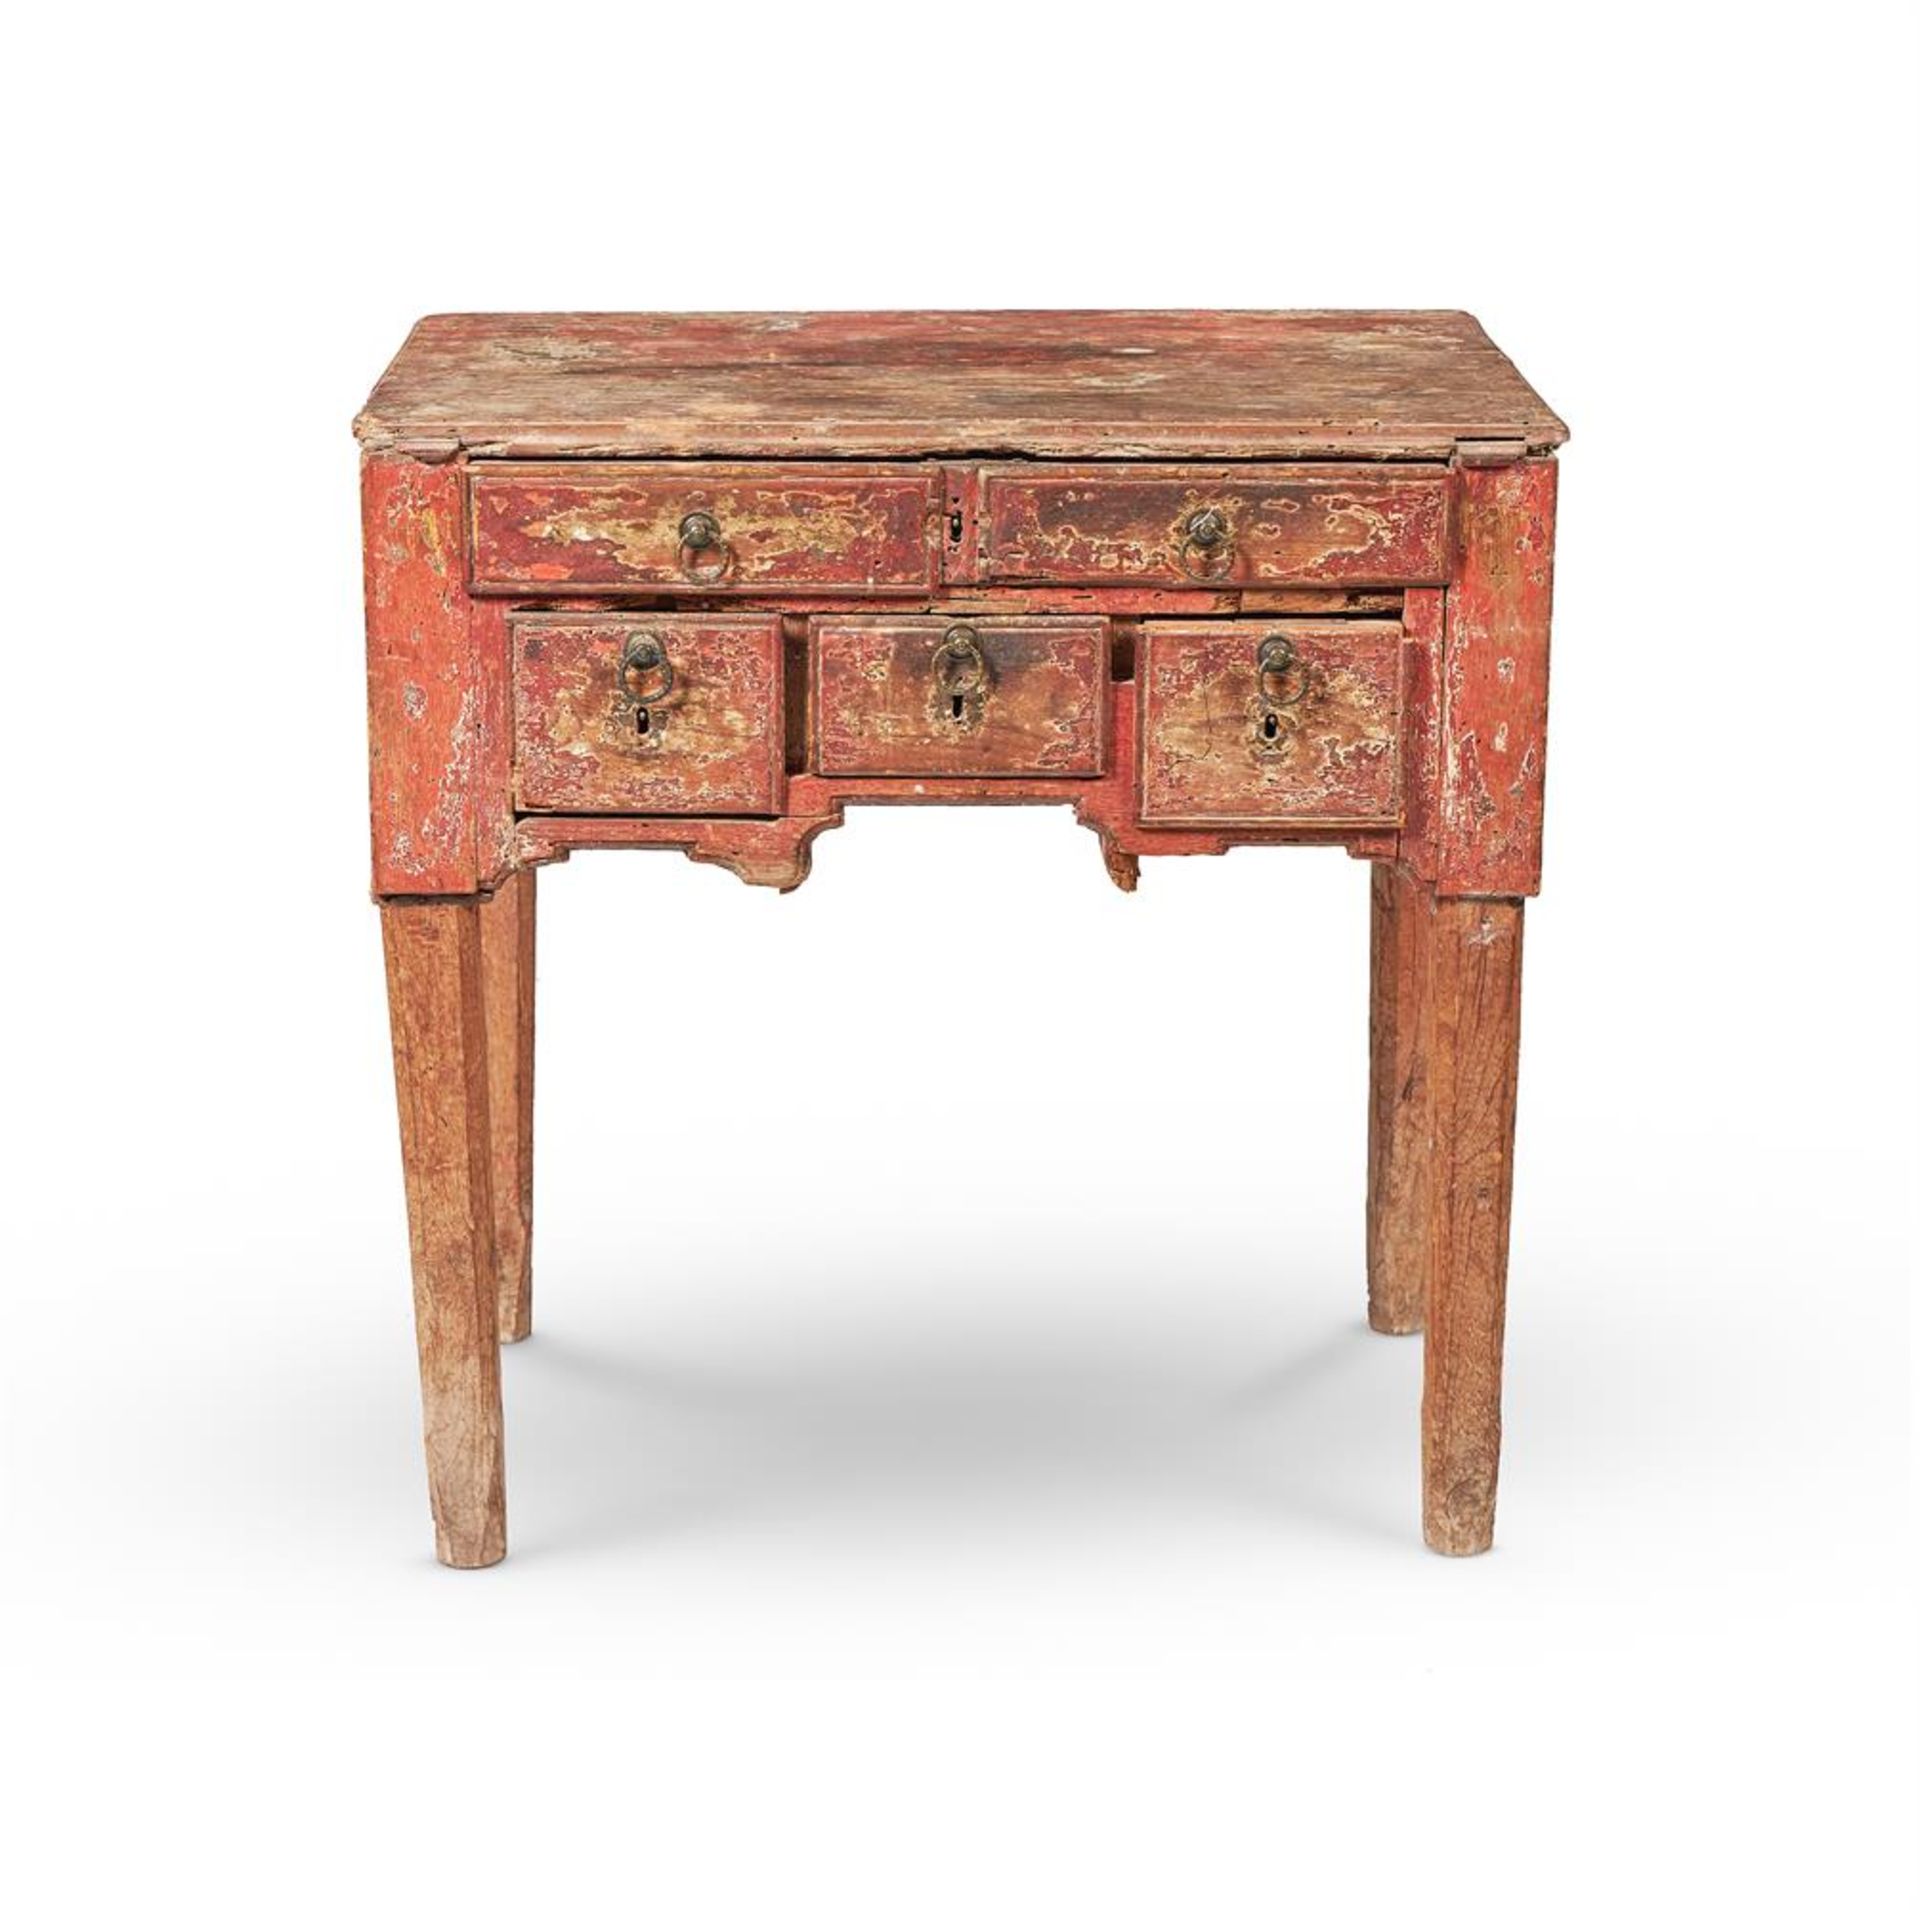 A GEORGE II PAINTED PINE SIDE TABLE, MID 18TH CENTURY AND LATER